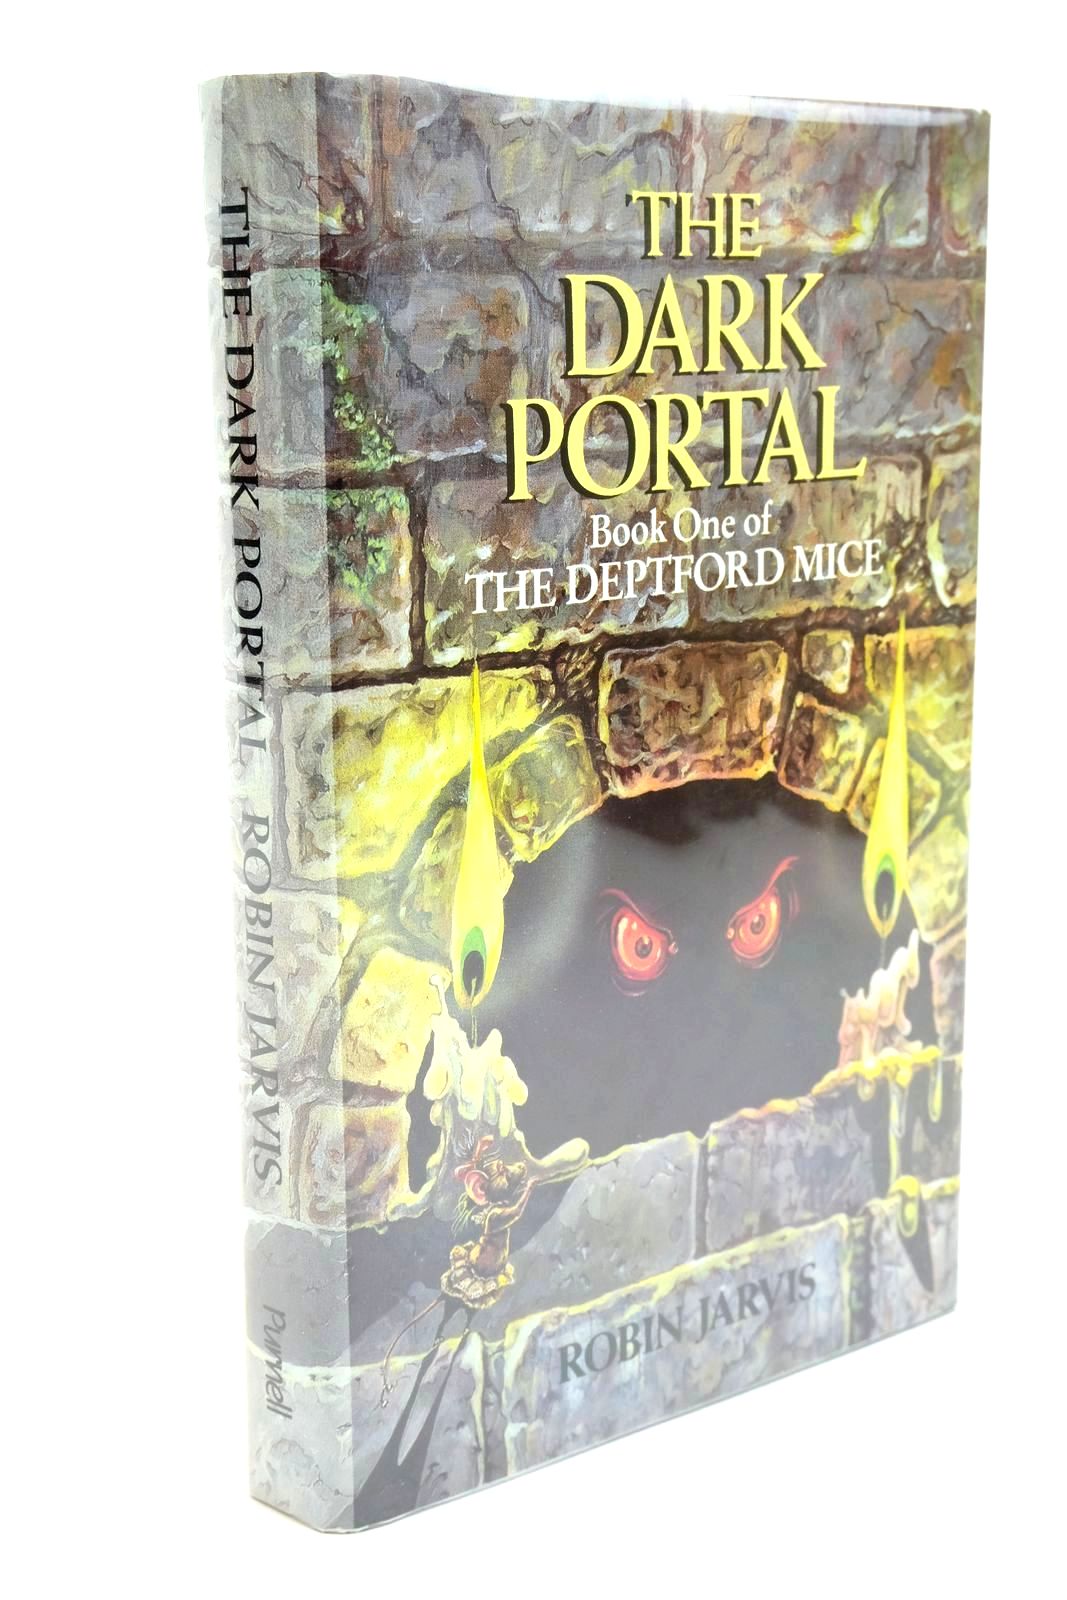 Photo of THE DARK PORTAL written by Jarvis, Robin illustrated by Jarvis, Robin published by Purnell (STOCK CODE: 1321873)  for sale by Stella & Rose's Books